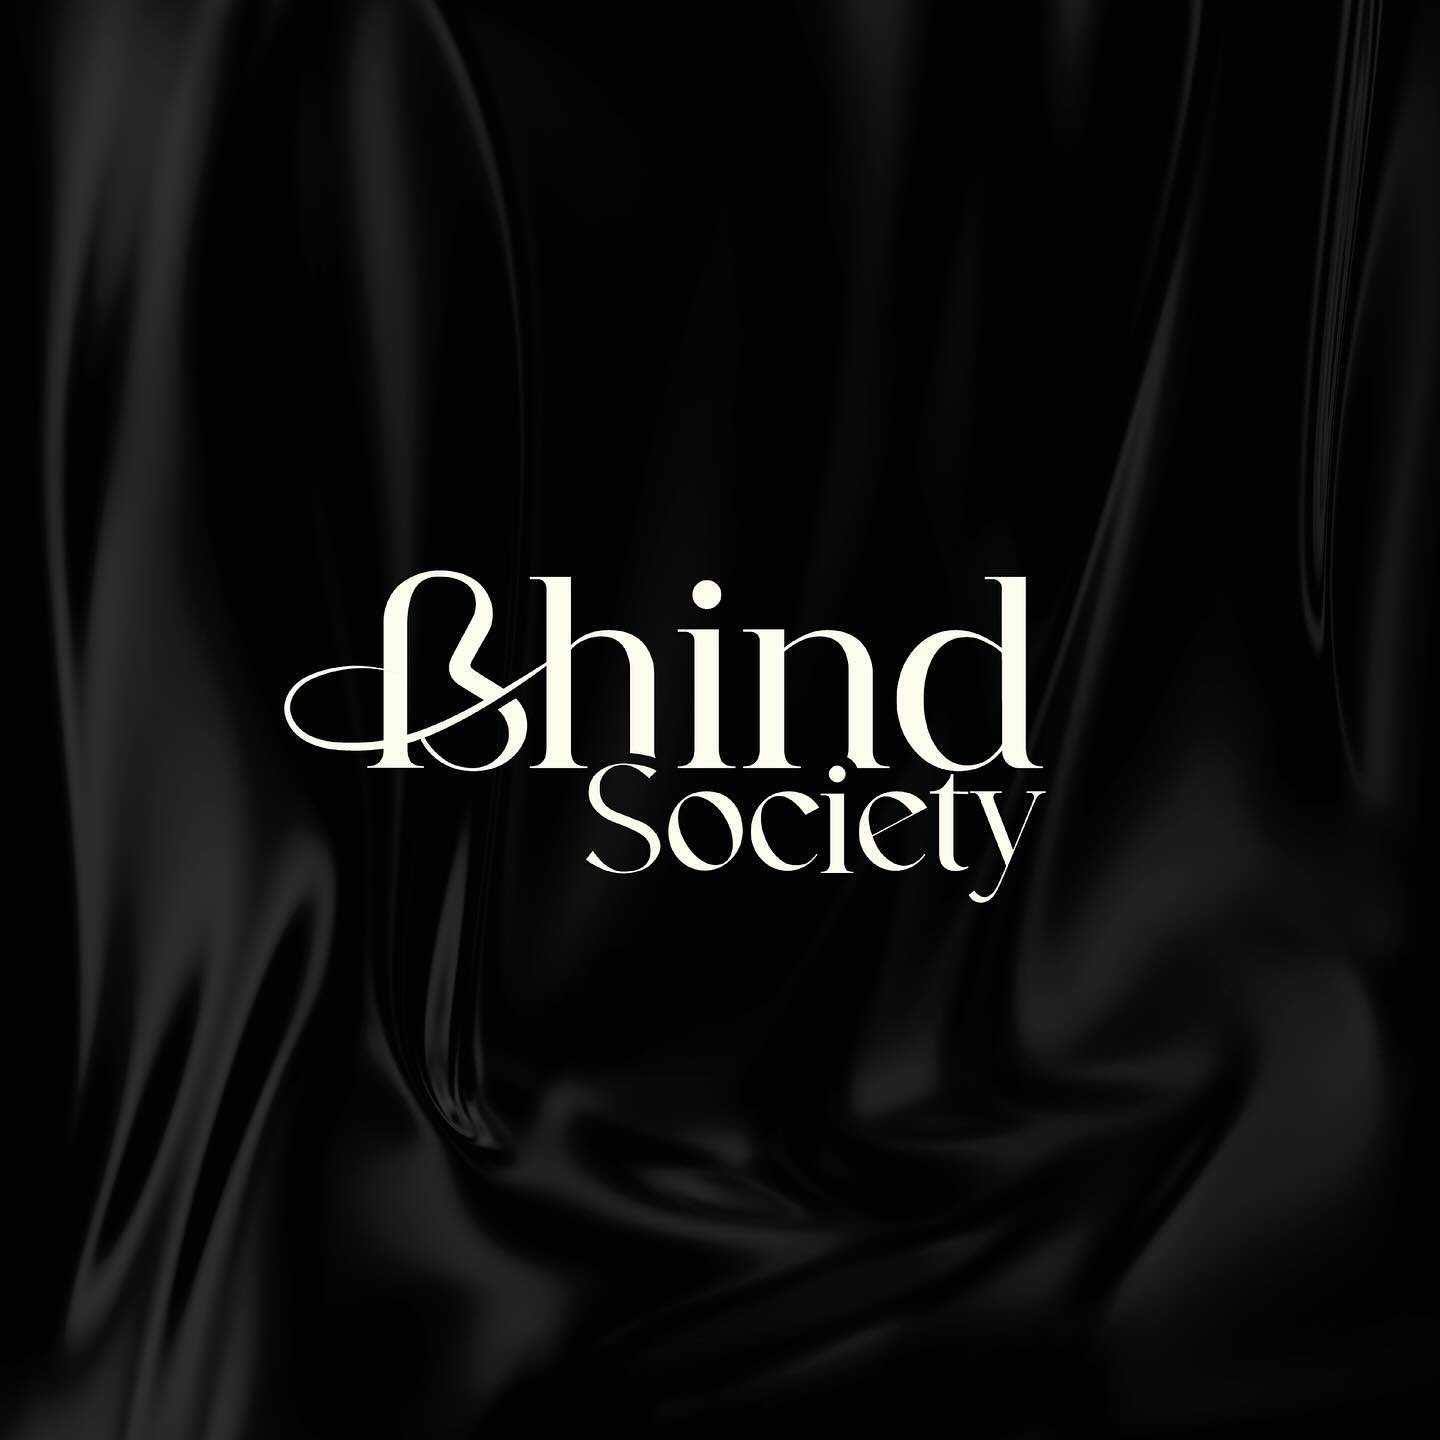 Excited to unveil this new beauty of a brand, Bhind Society 🌶️🥵

Bhind society is dedicated to creating a sanctuary where individuals&mdash;both couples and singles&mdash;can come together &amp; enrich their sexual lifestyles in a safe, private spa